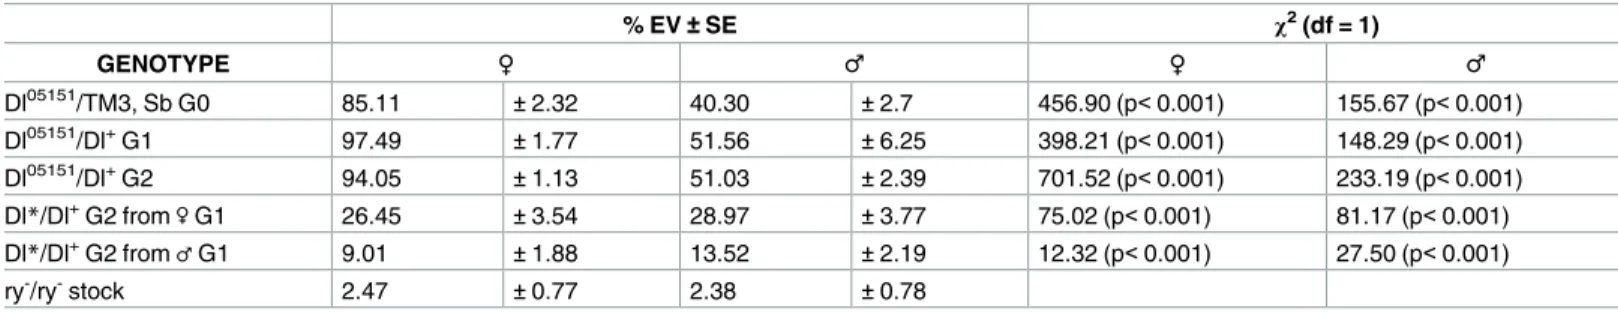 Table 1. Quantification of the extra-vein phenotypes in the G0, G1 and G2.